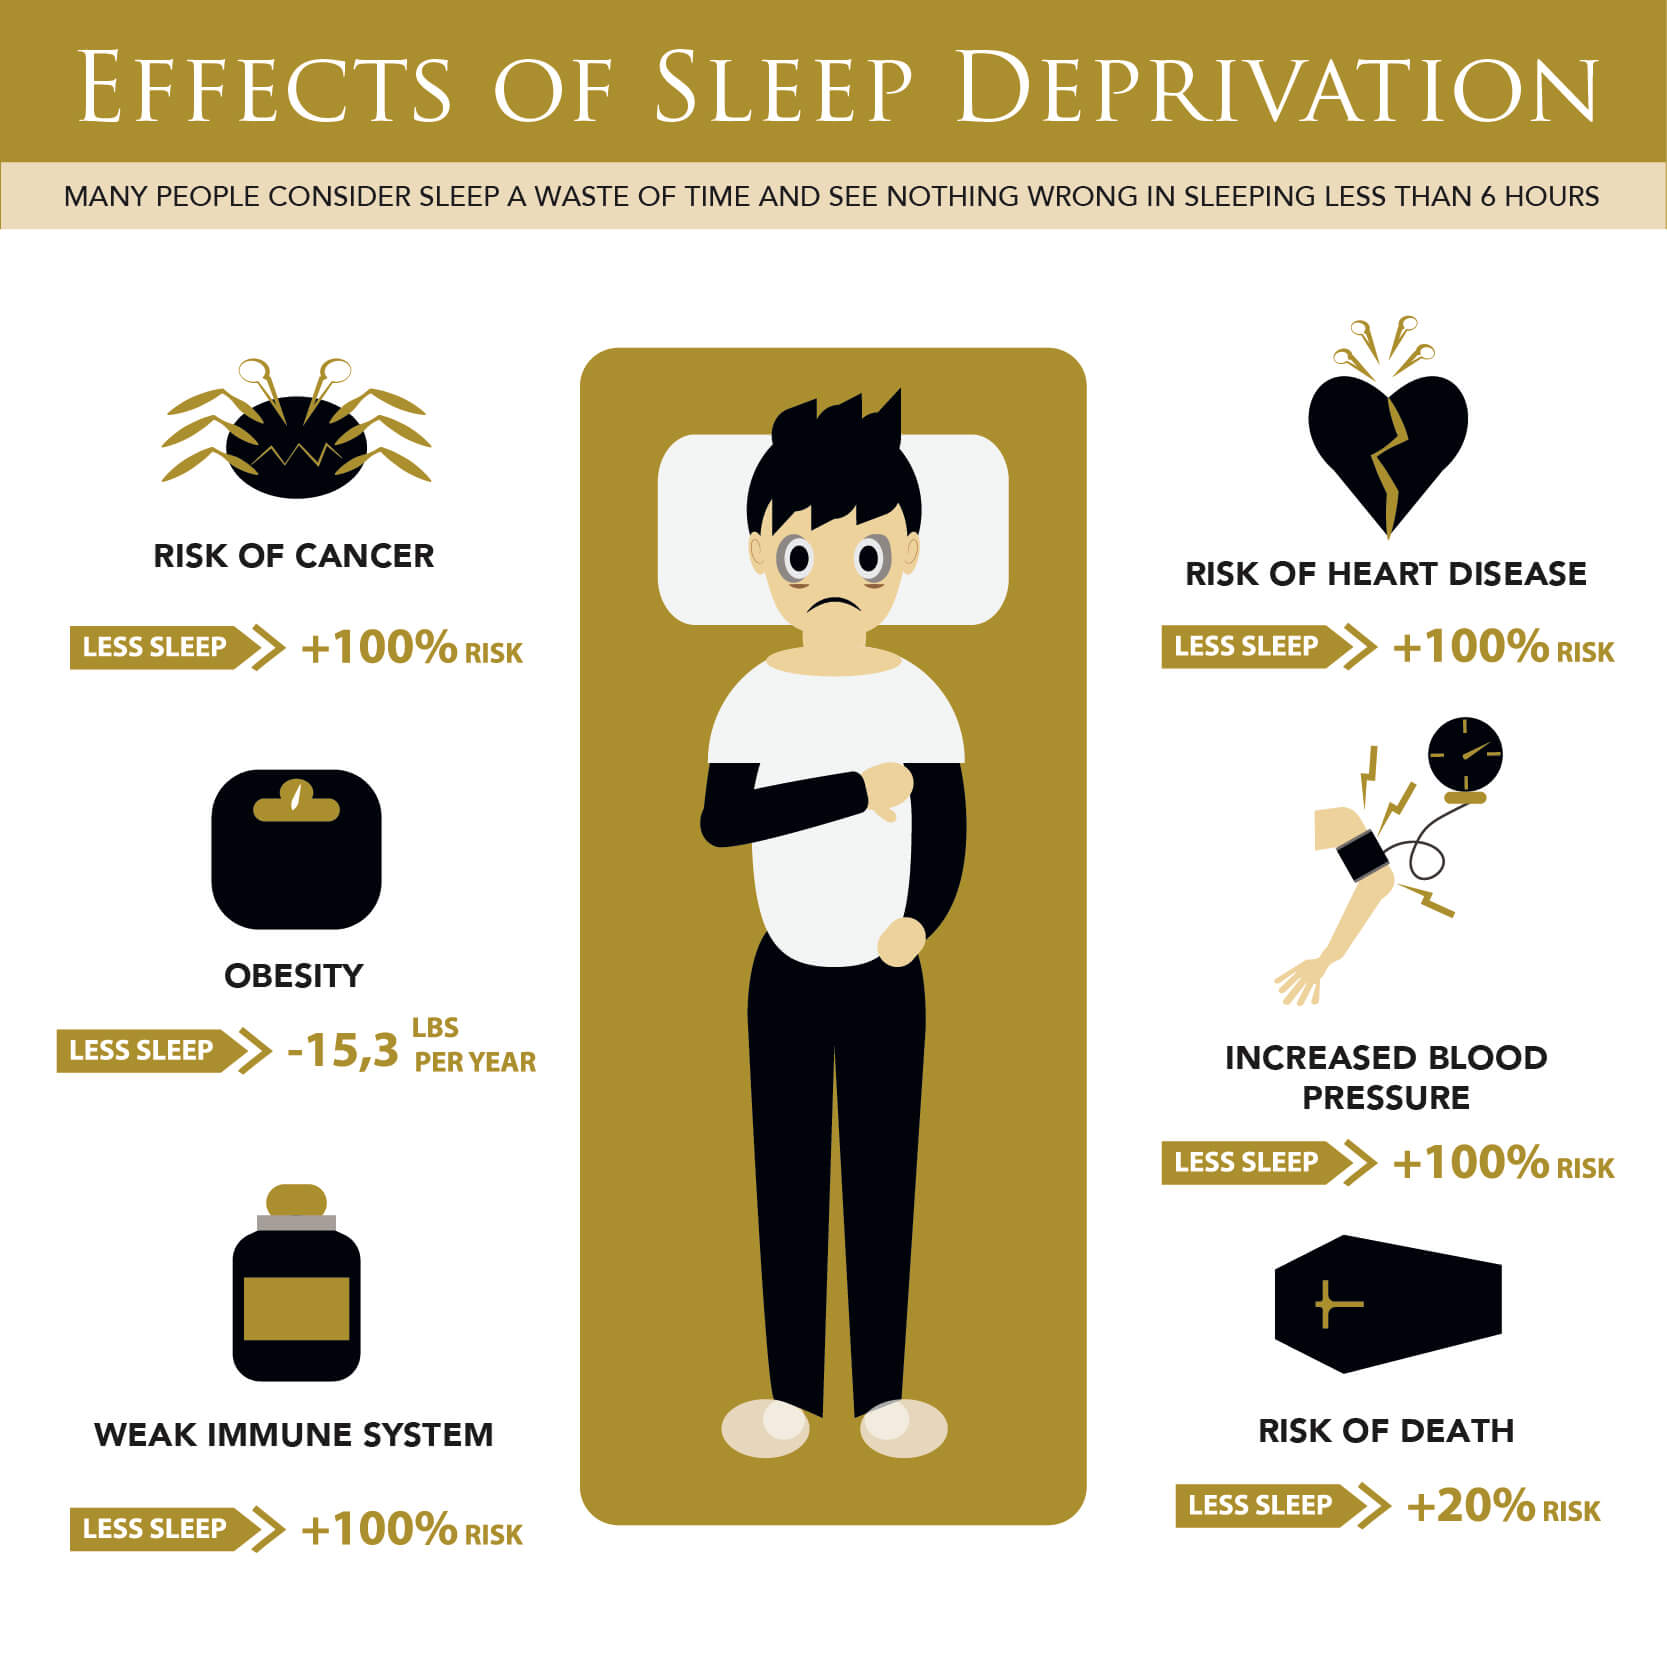 effects of sleep deprivation infographic